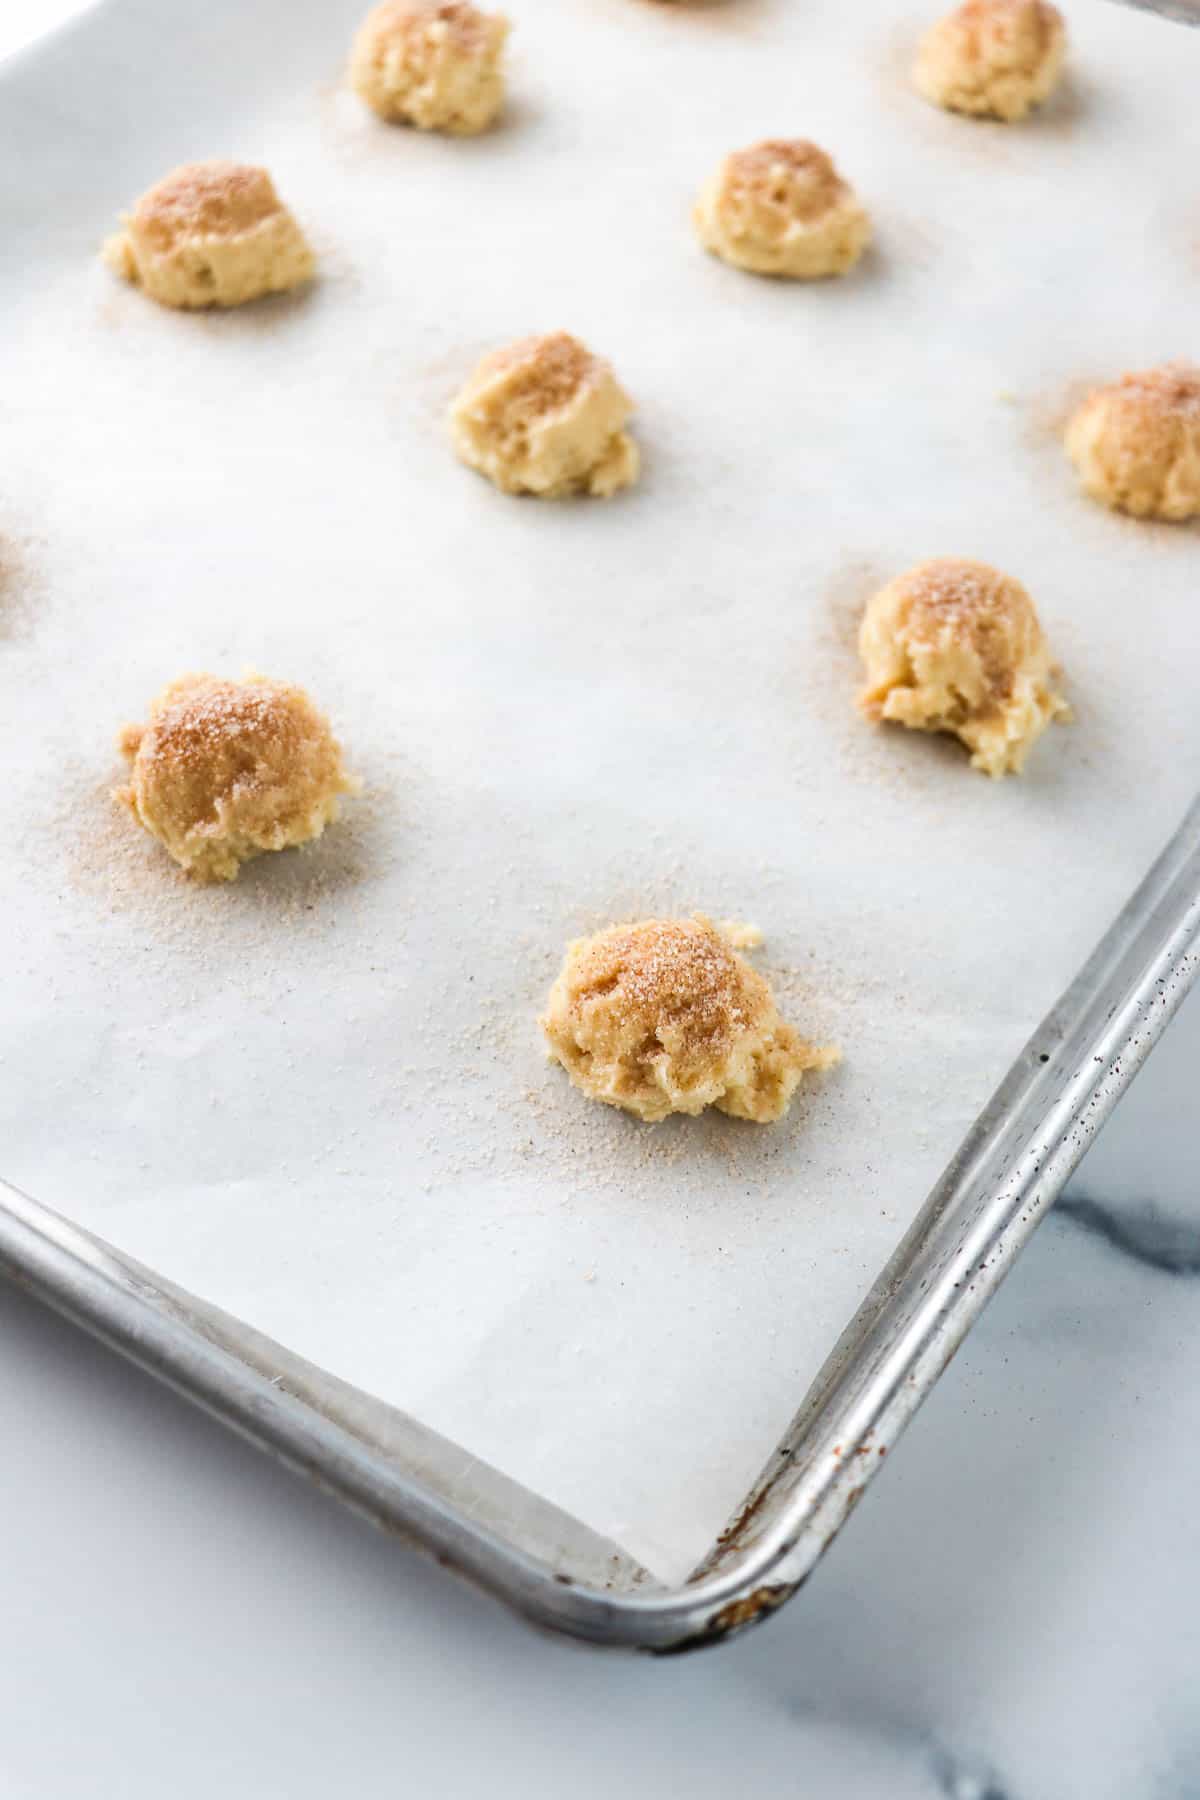 Unbaked Old-Fashioned Buttermilk Cookies on a baking sheet sprinkled with cinnamon and sugar.